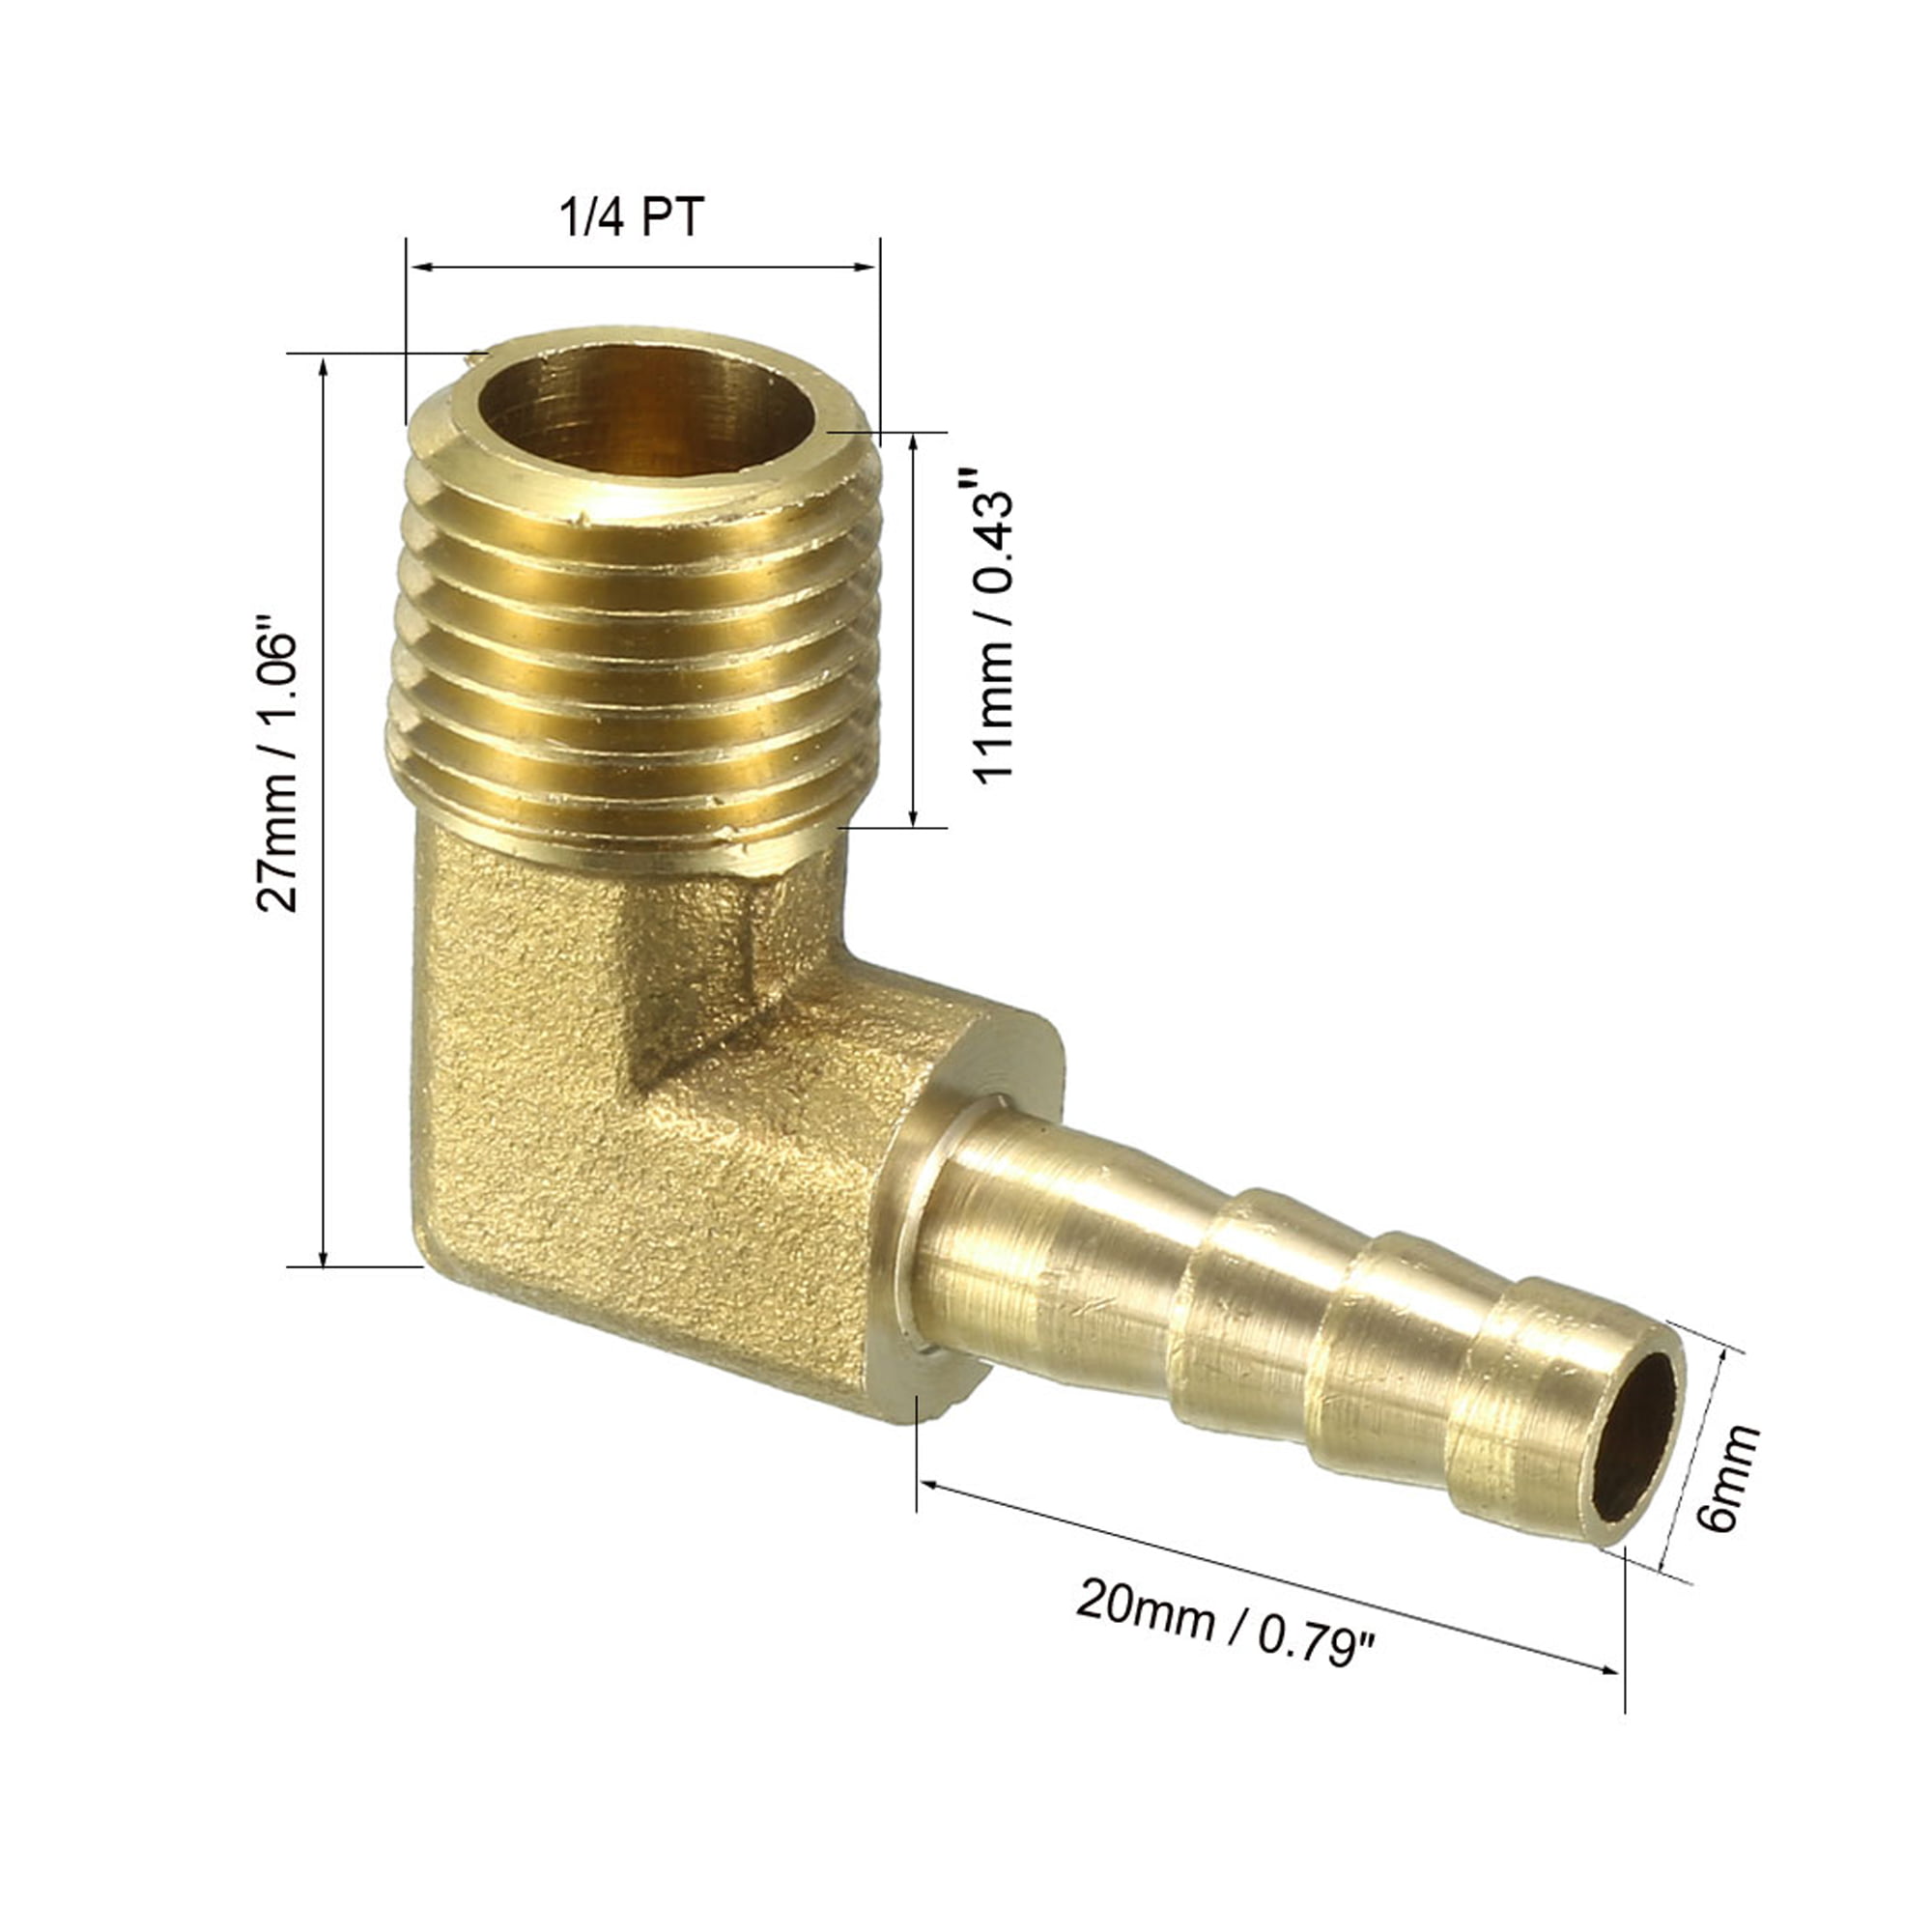 Push On Heater Hose Line Connector Fitting Connector,Automotive Cooling Parts Pronese 3 Pack Premium Solid Brass Hose Barb Adapters 1/4 Male NPT x 1/4 Barb Straight Swivel Hose Fitting 